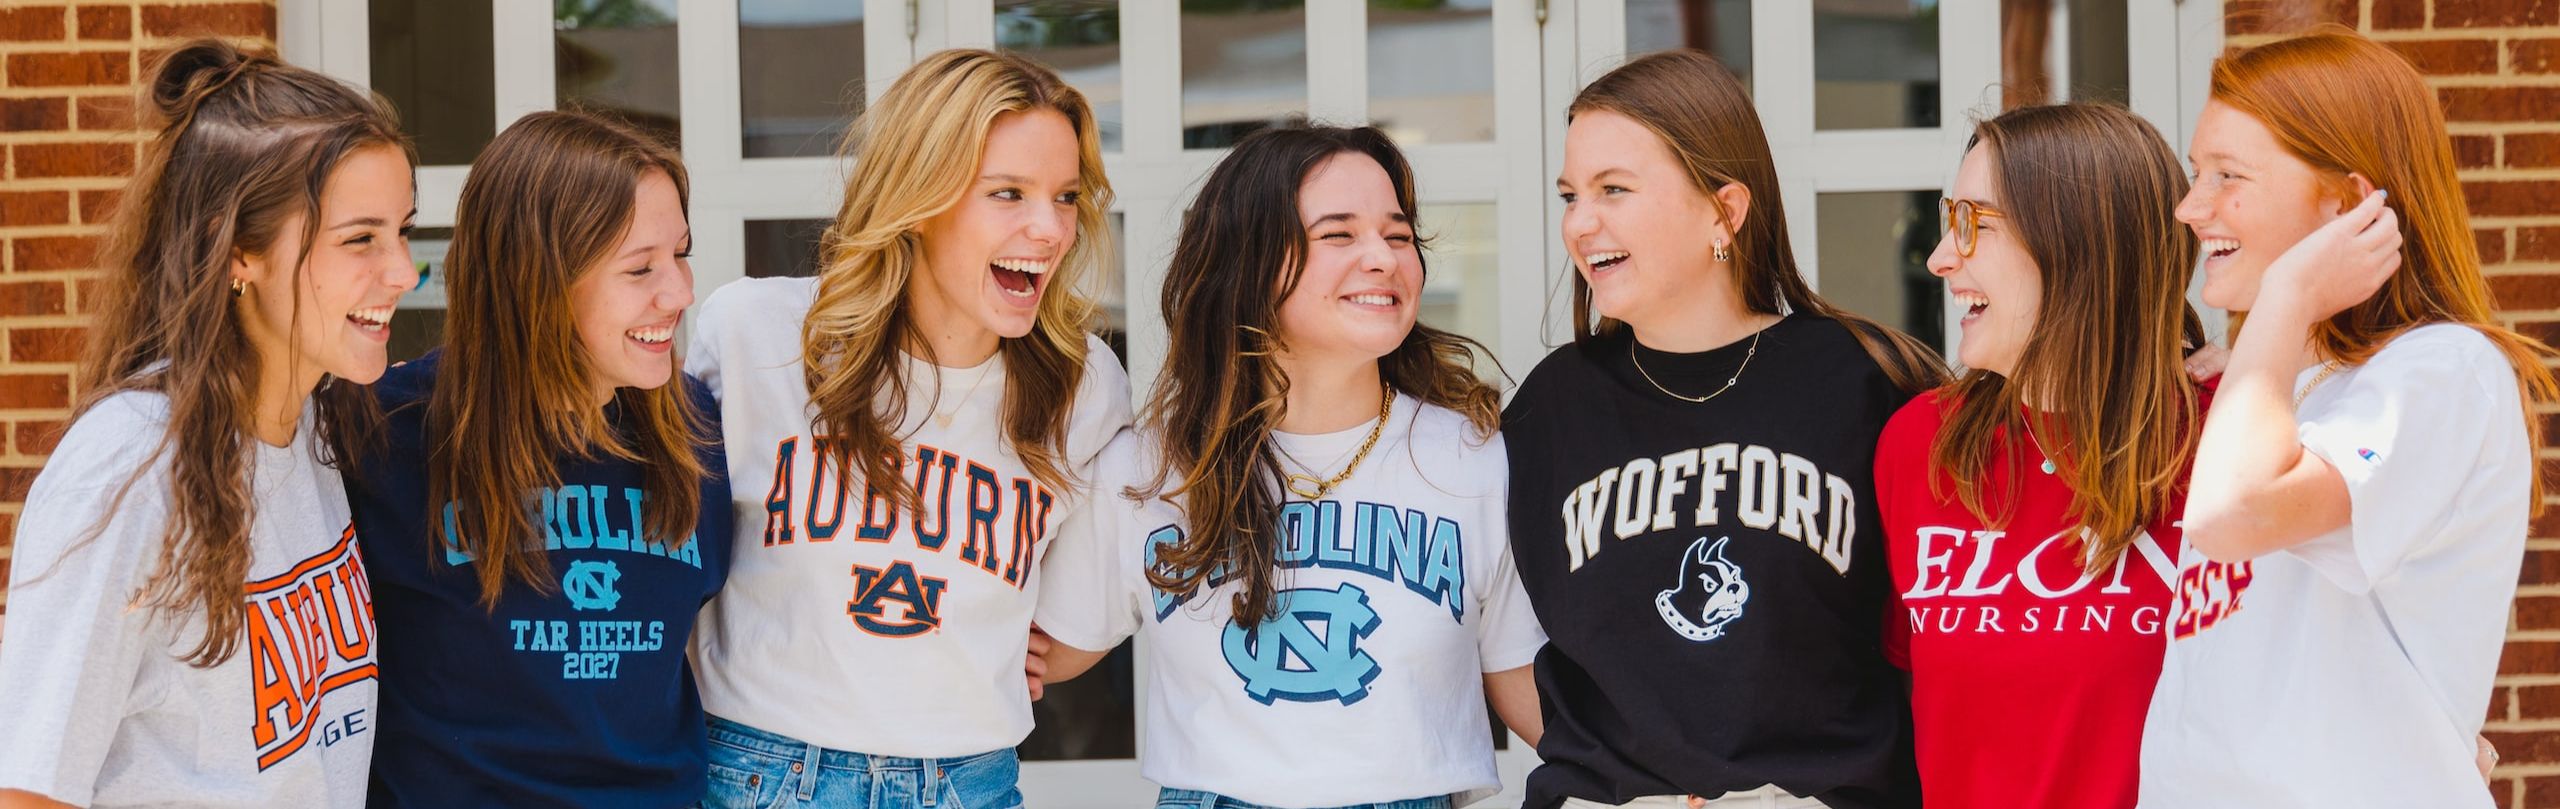 High school girls laughing together, each wearing a college t-shirt, representing the excitement and camaraderie of college decision day at school.